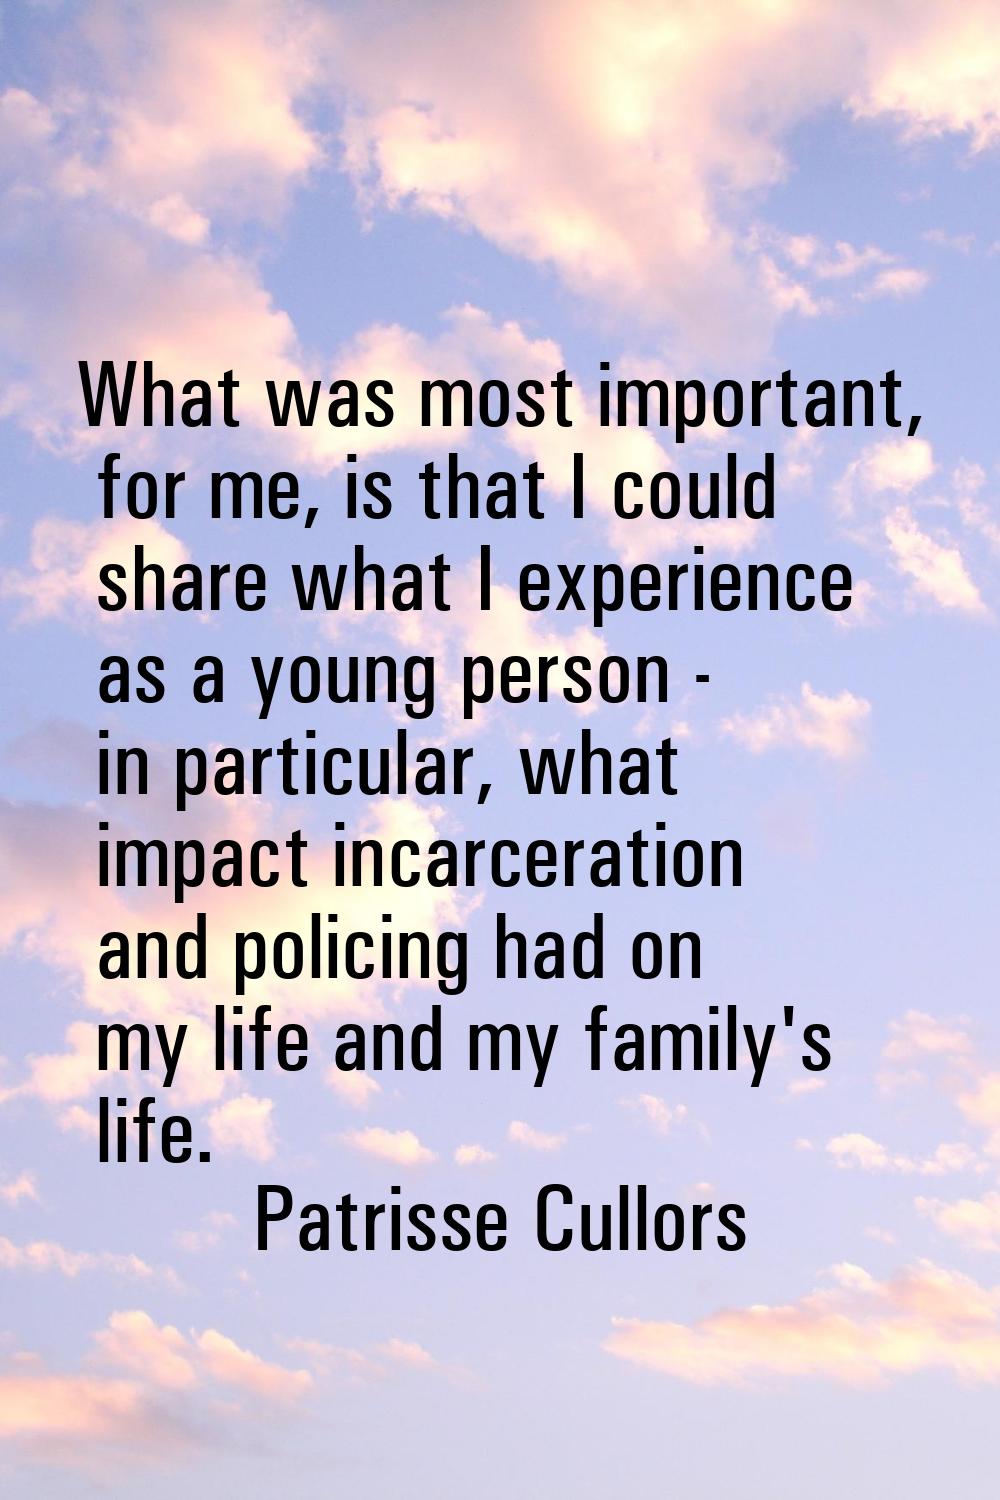 What was most important, for me, is that I could share what I experience as a young person - in par